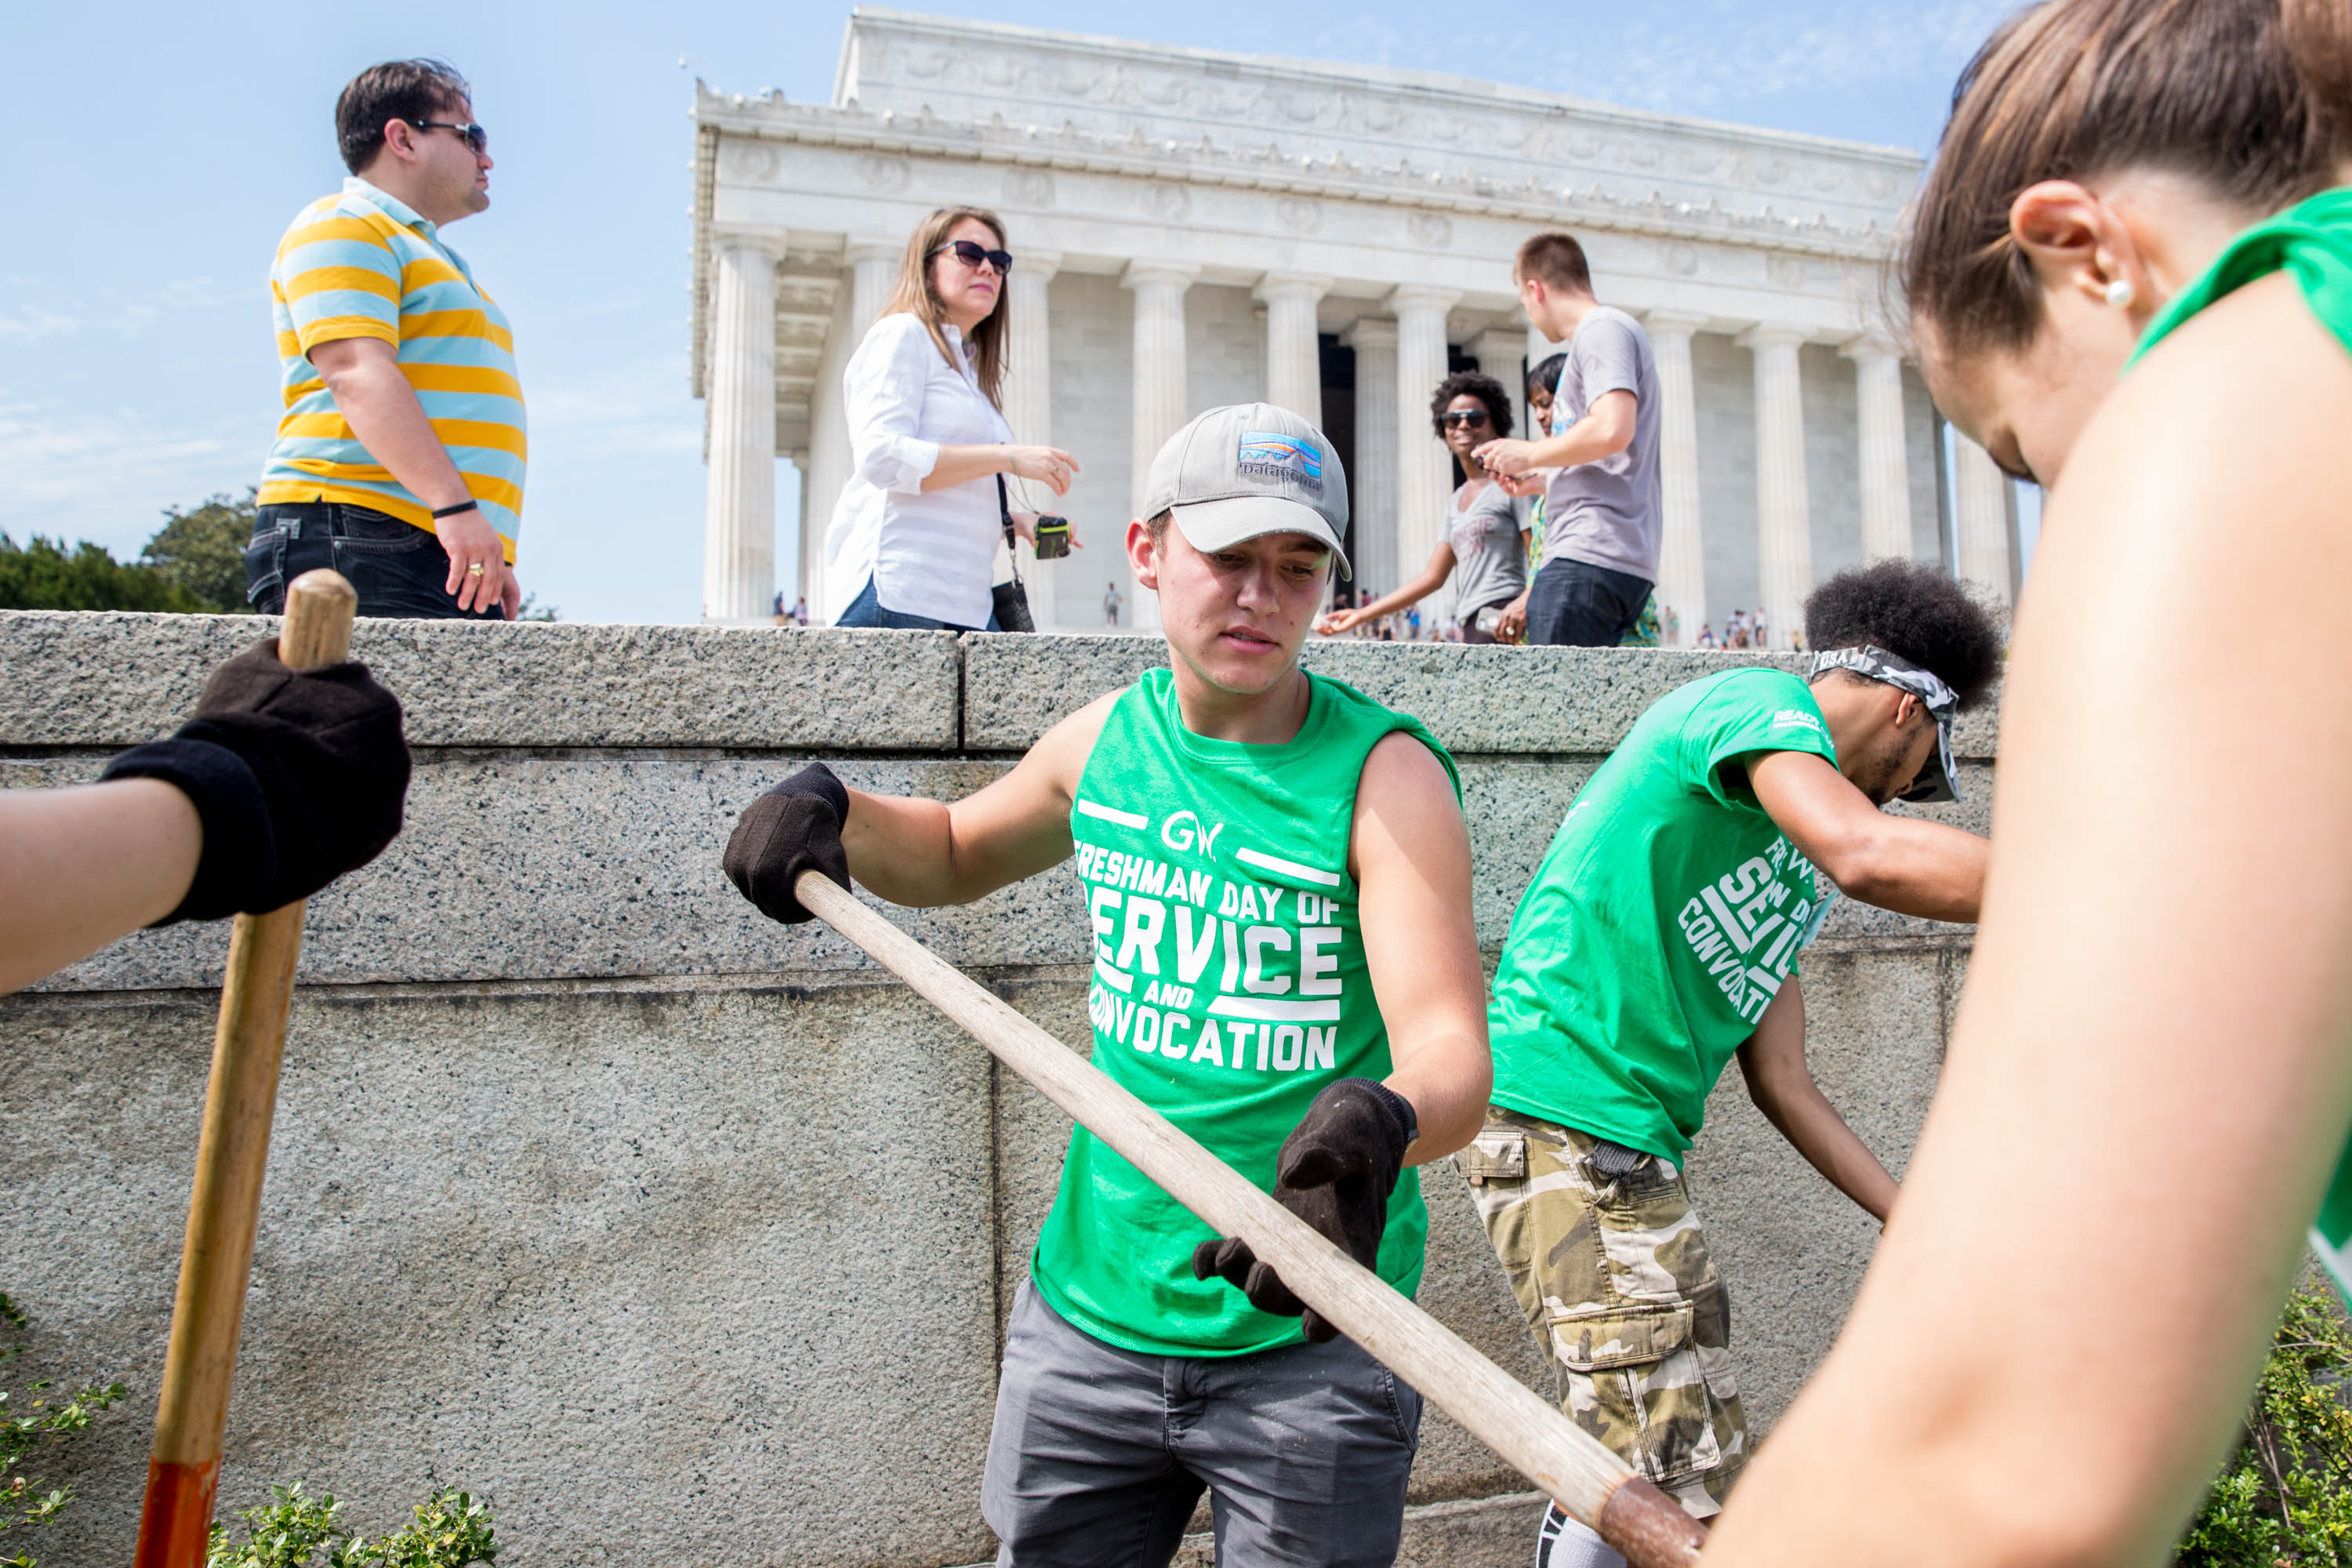 Day of service at Lincoln Memorial